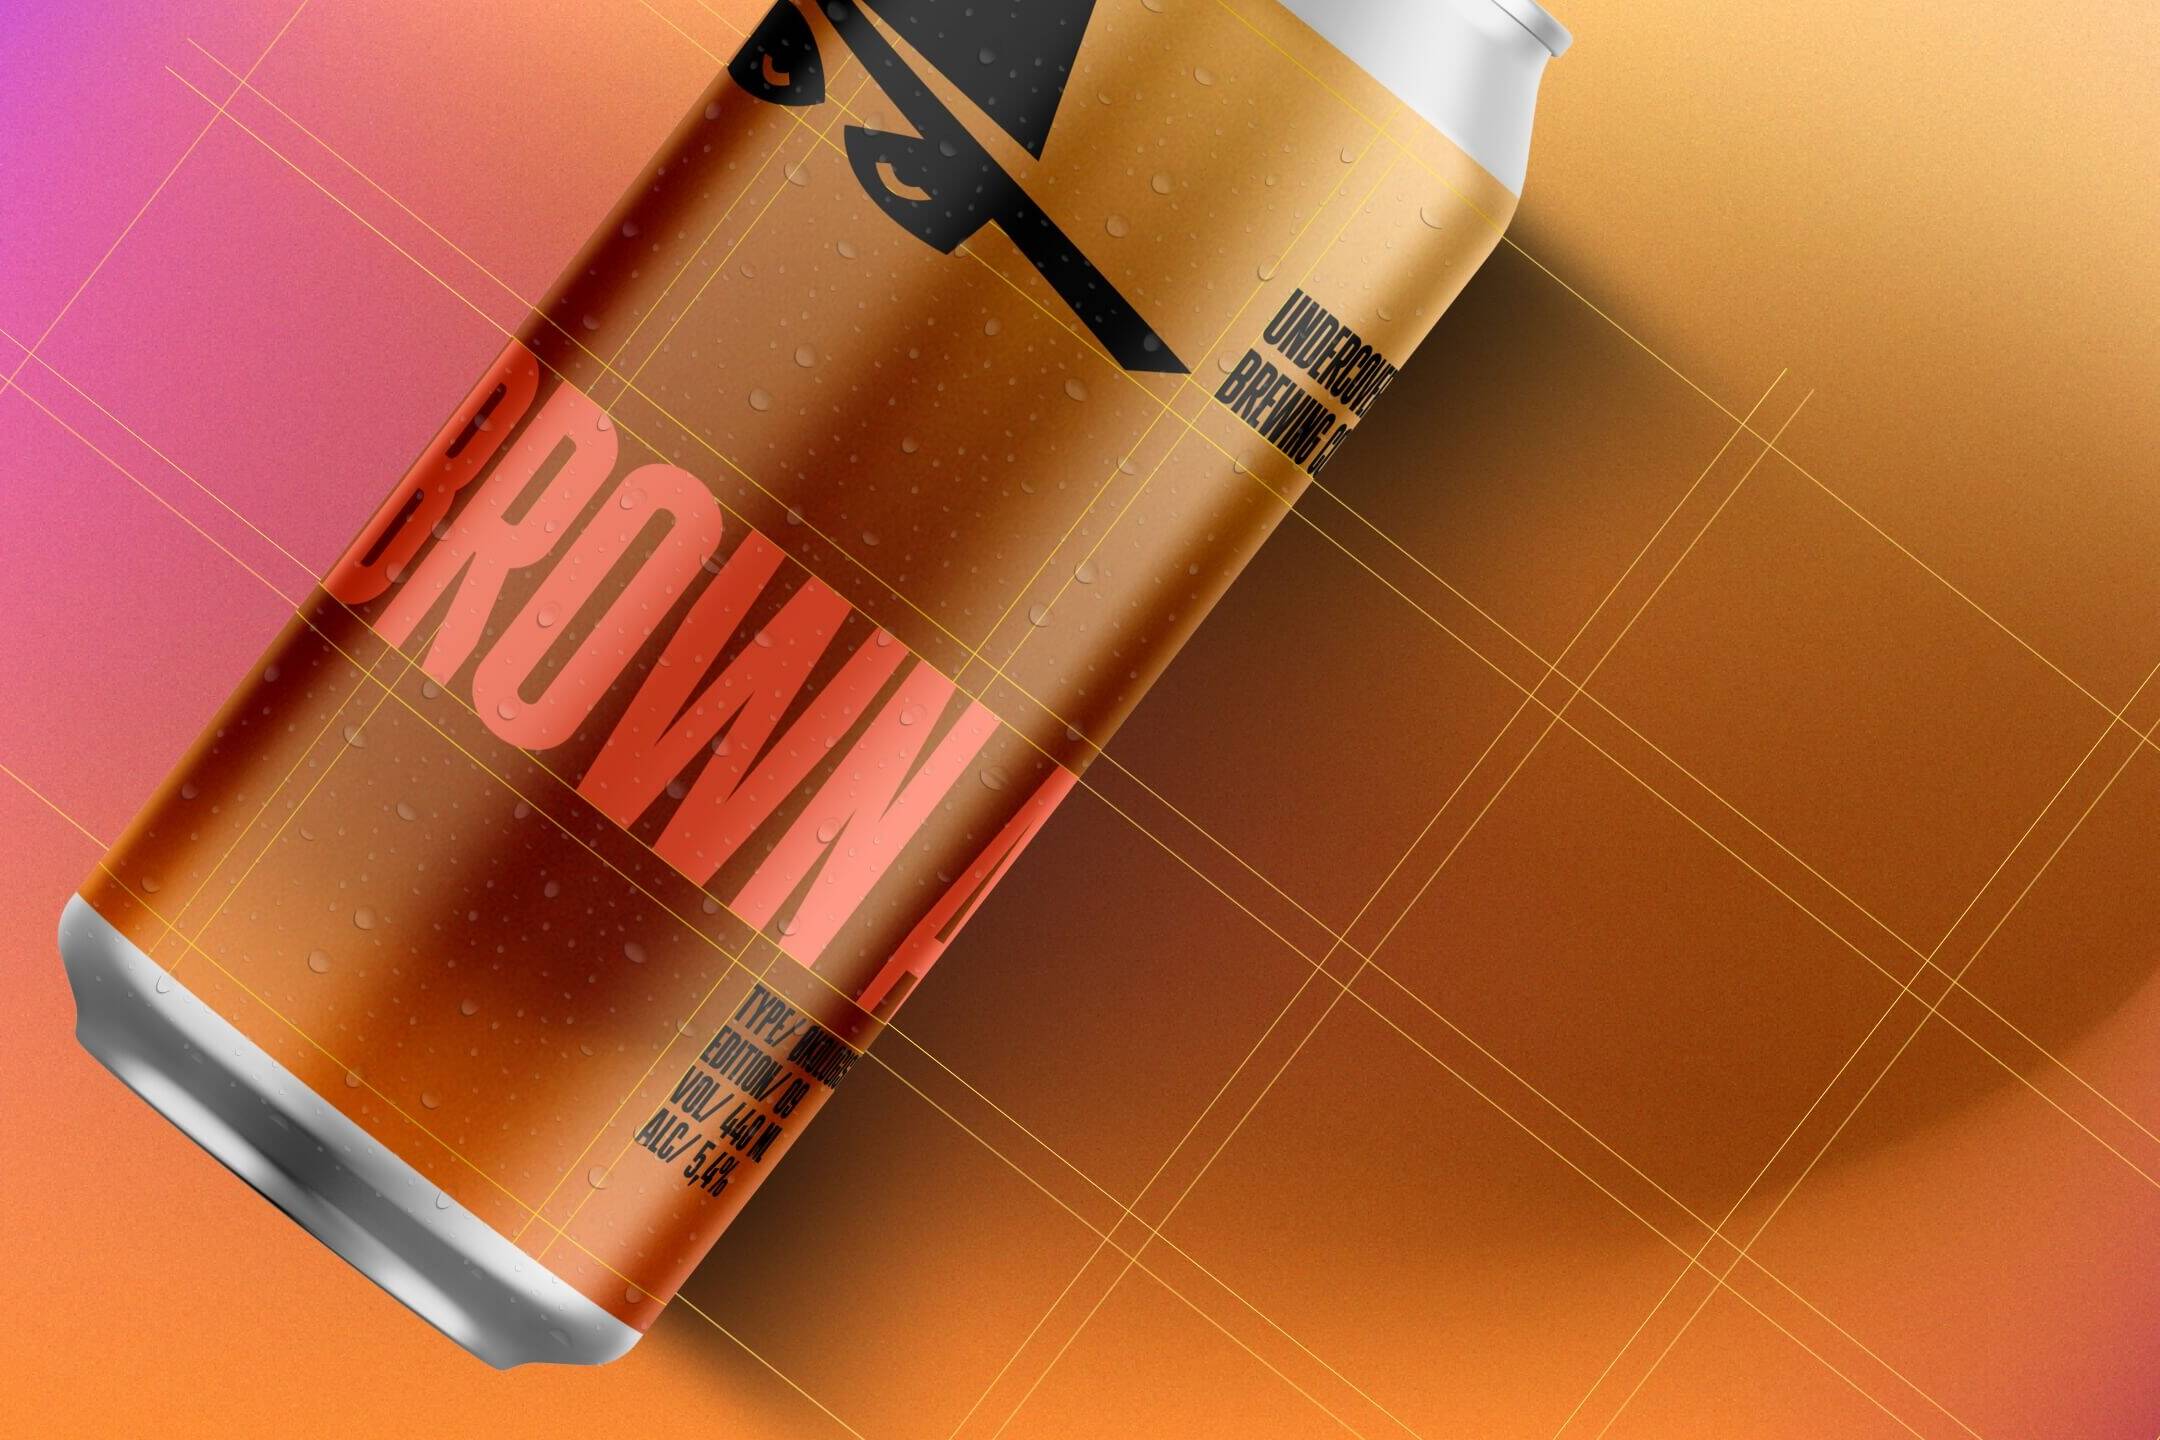 Undercover Brown Ale